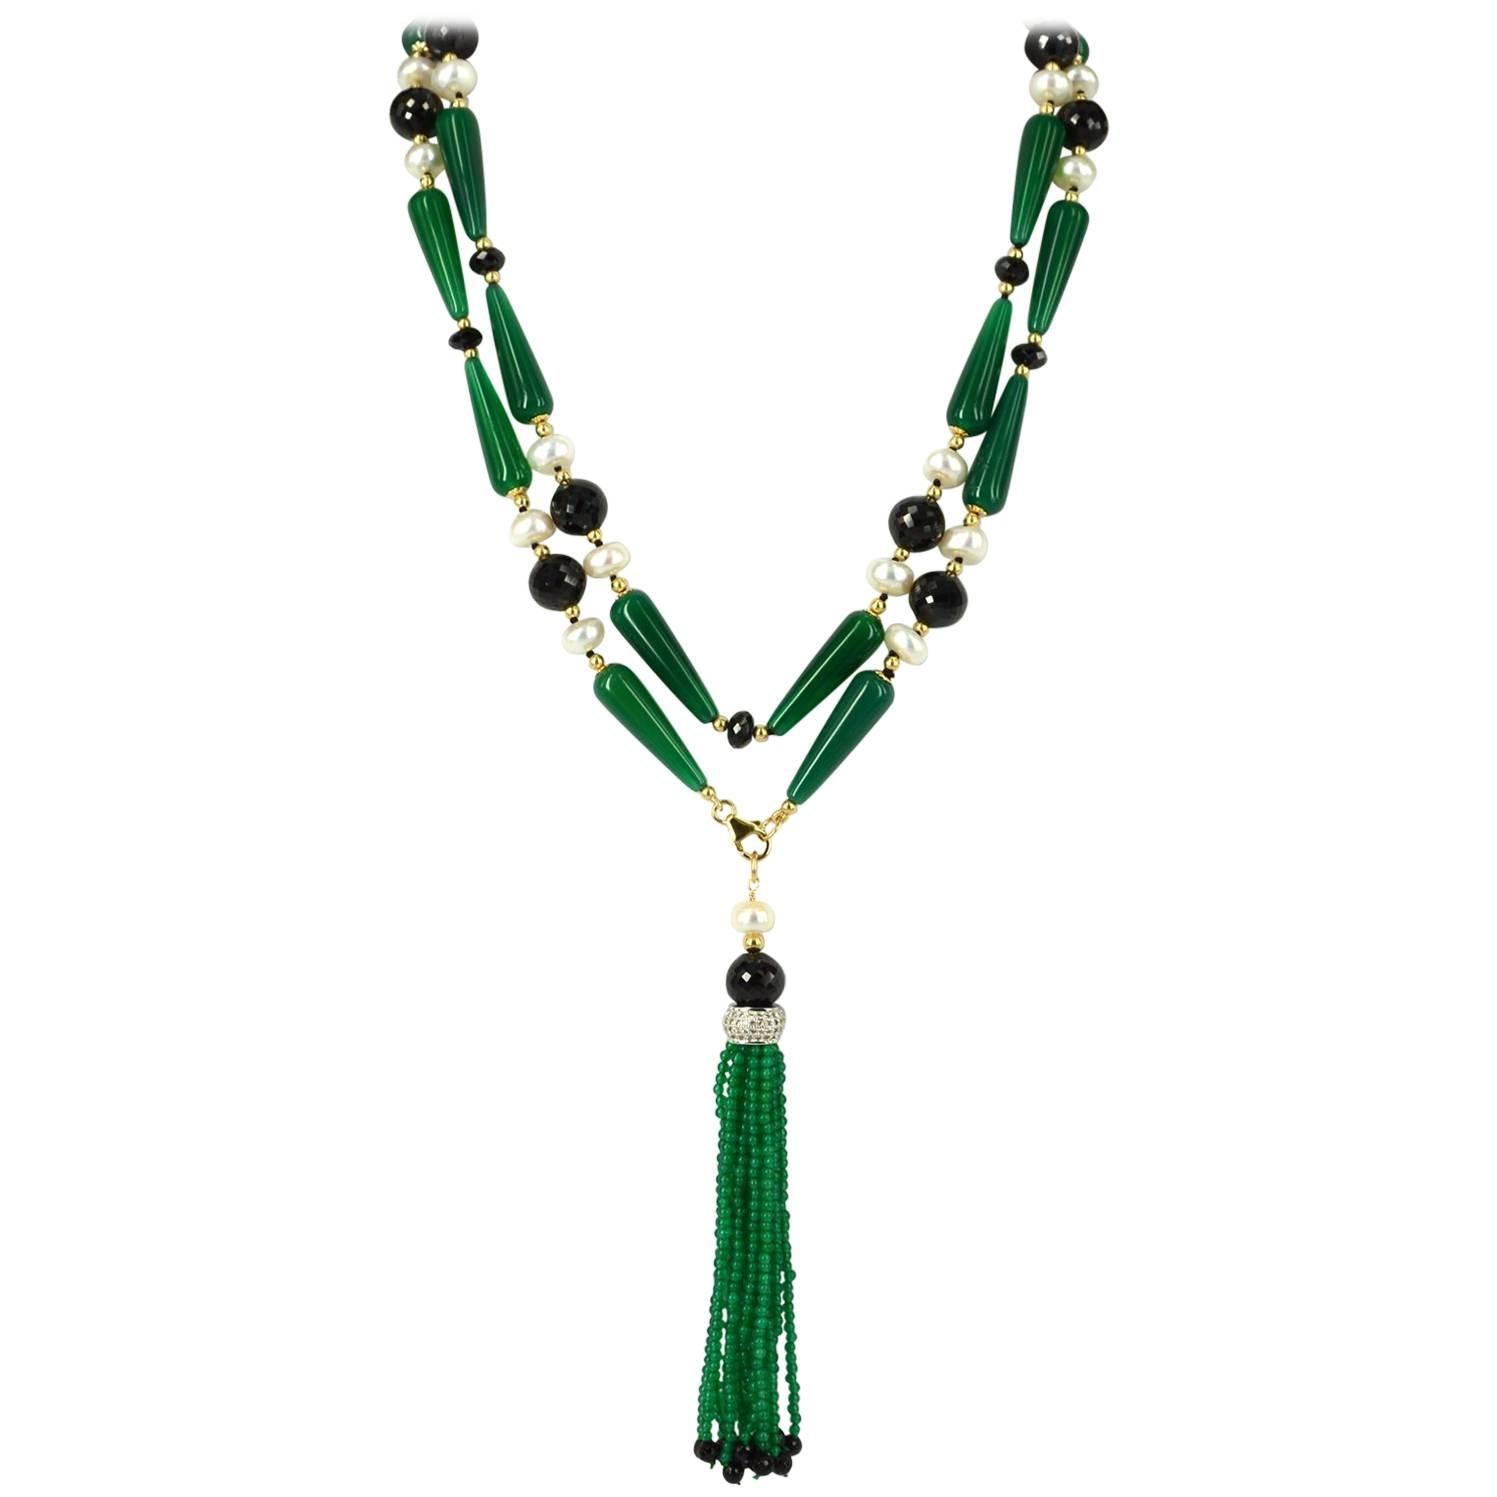 Decadent Jewels Spinel Pearl Green Agate Sautoir Necklace with Detachable Tassel